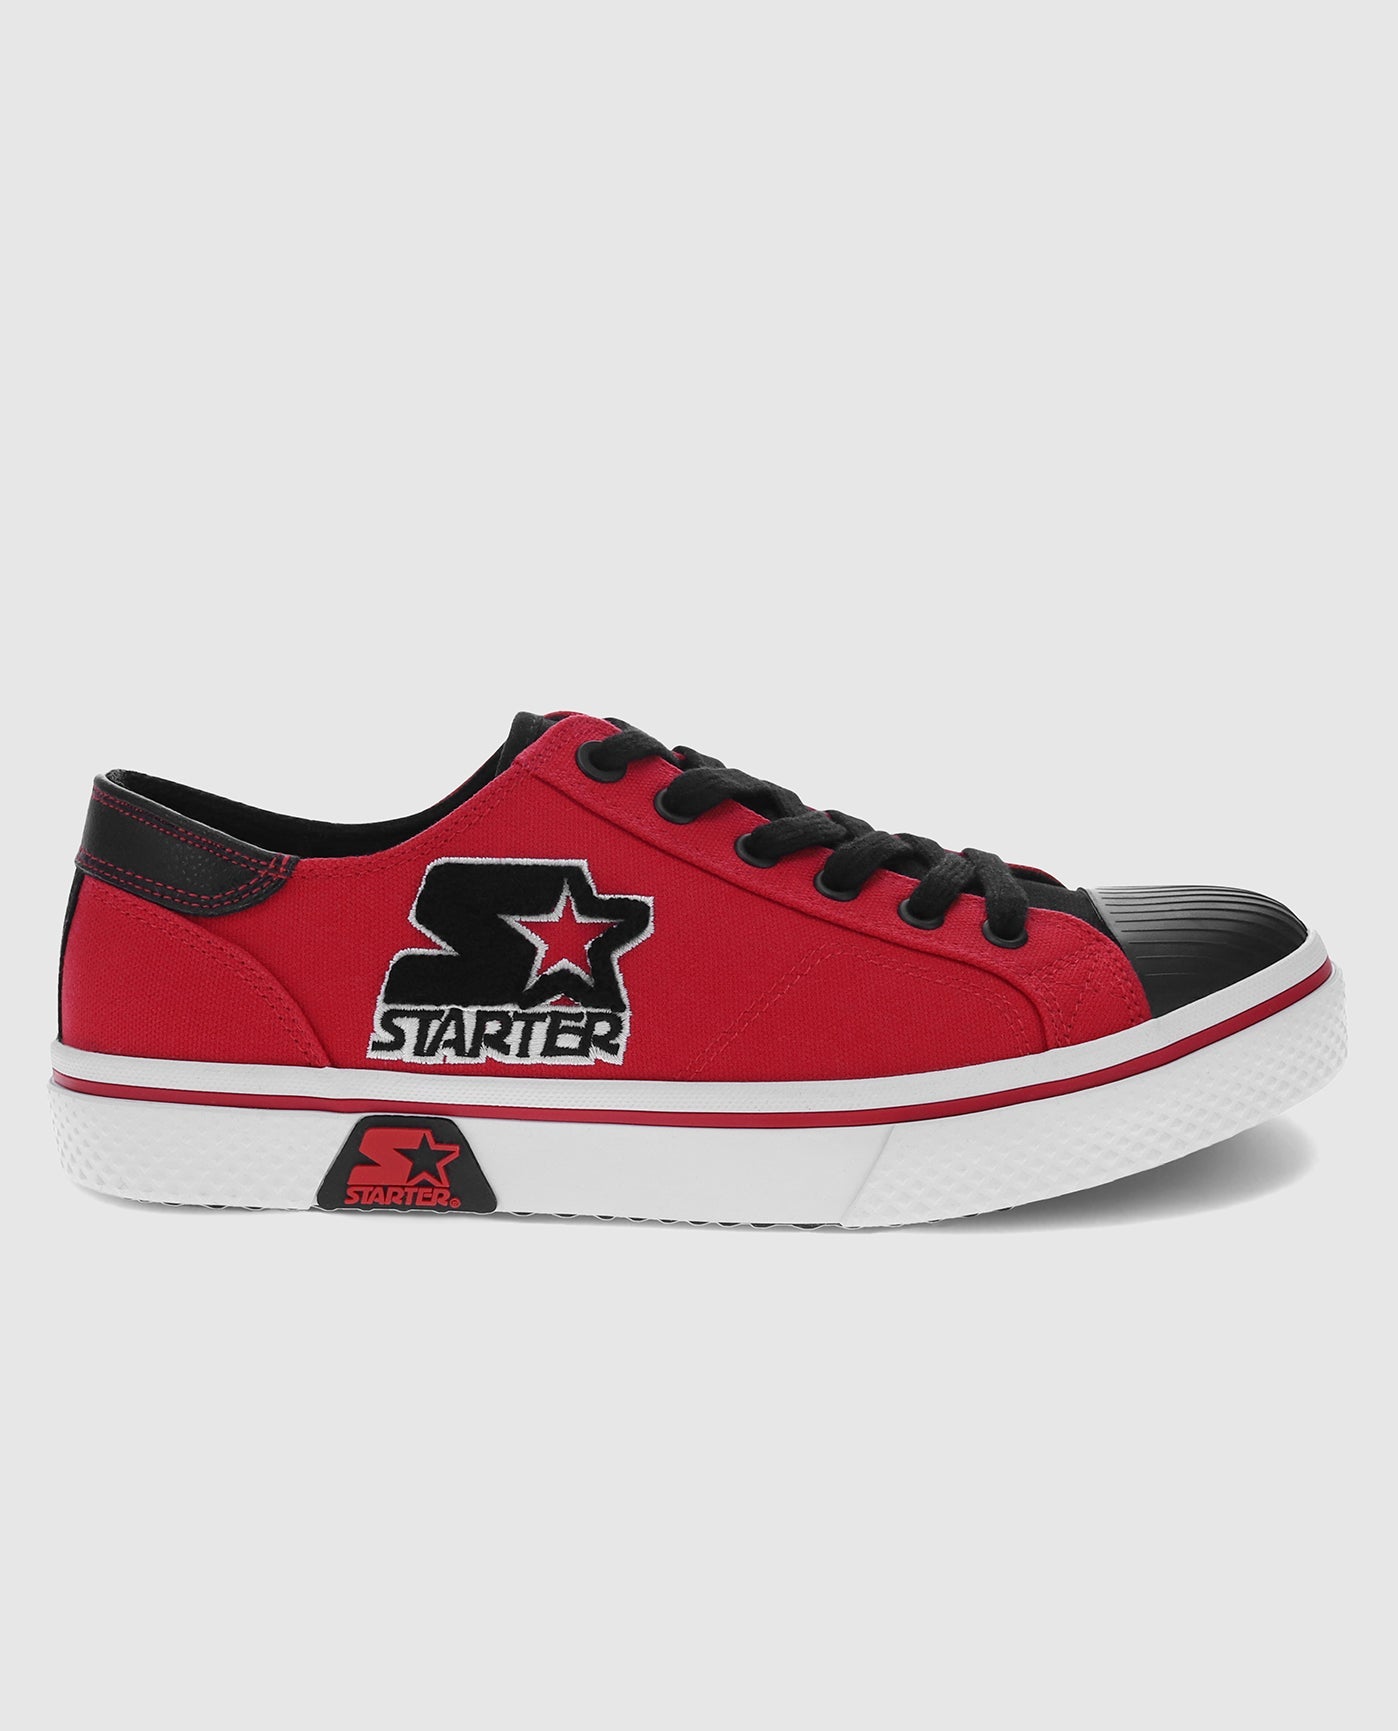 Outside Side View Of Starter Tradition 71 Low Red Single Sneaker | Red